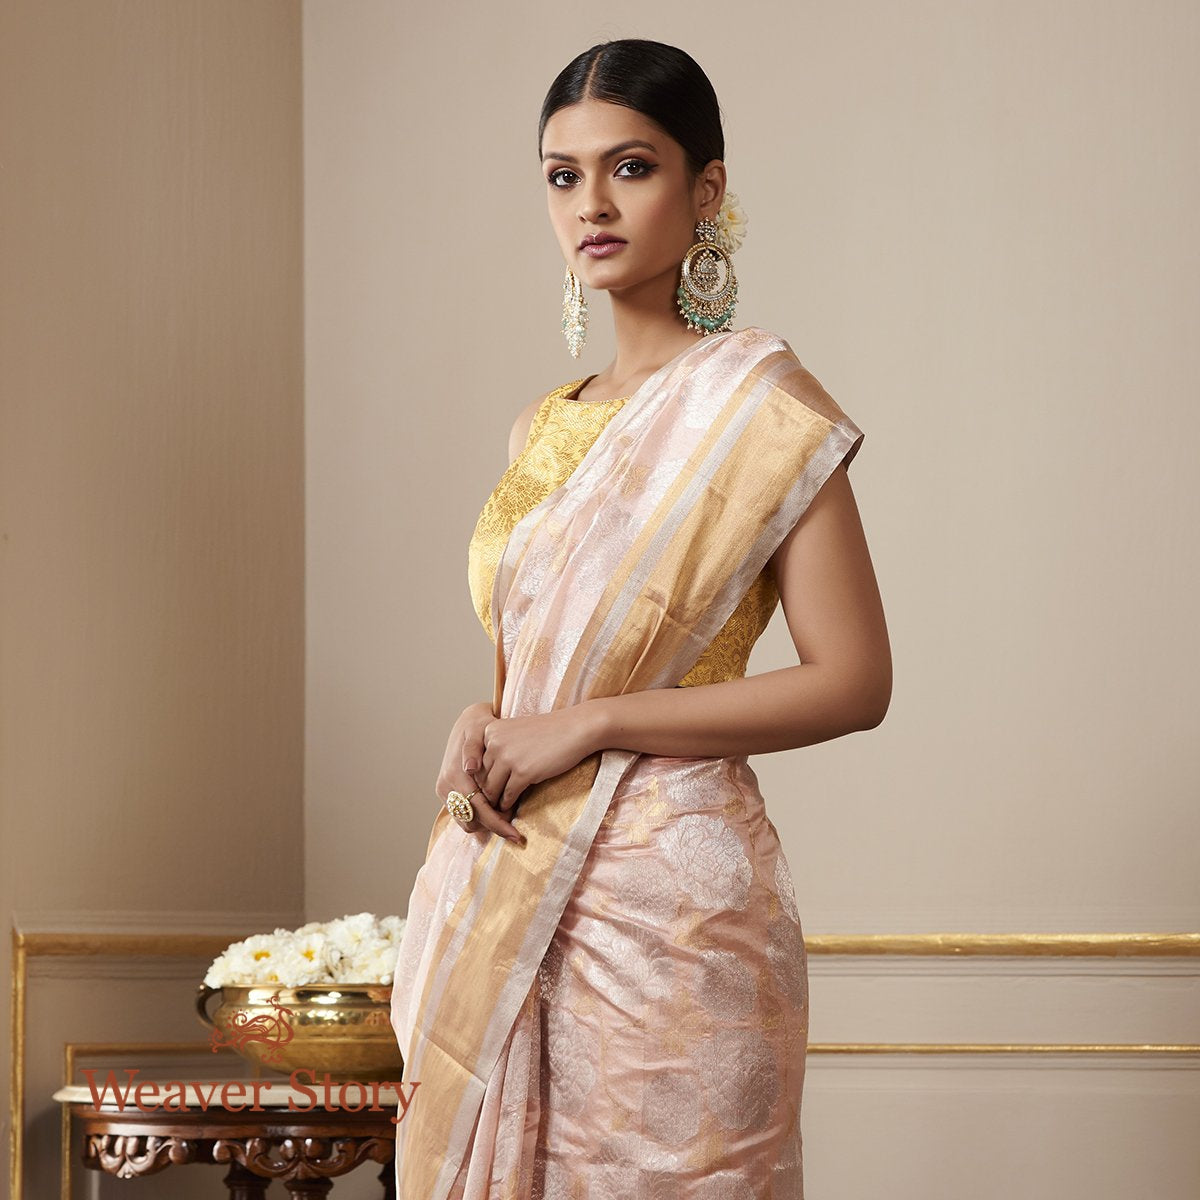 Handwoven_Soft_Pink_Chanderi_Silk_Saree_with_Gold_and_Silver_Zari_Floral_Jaal_WeaverStory_01